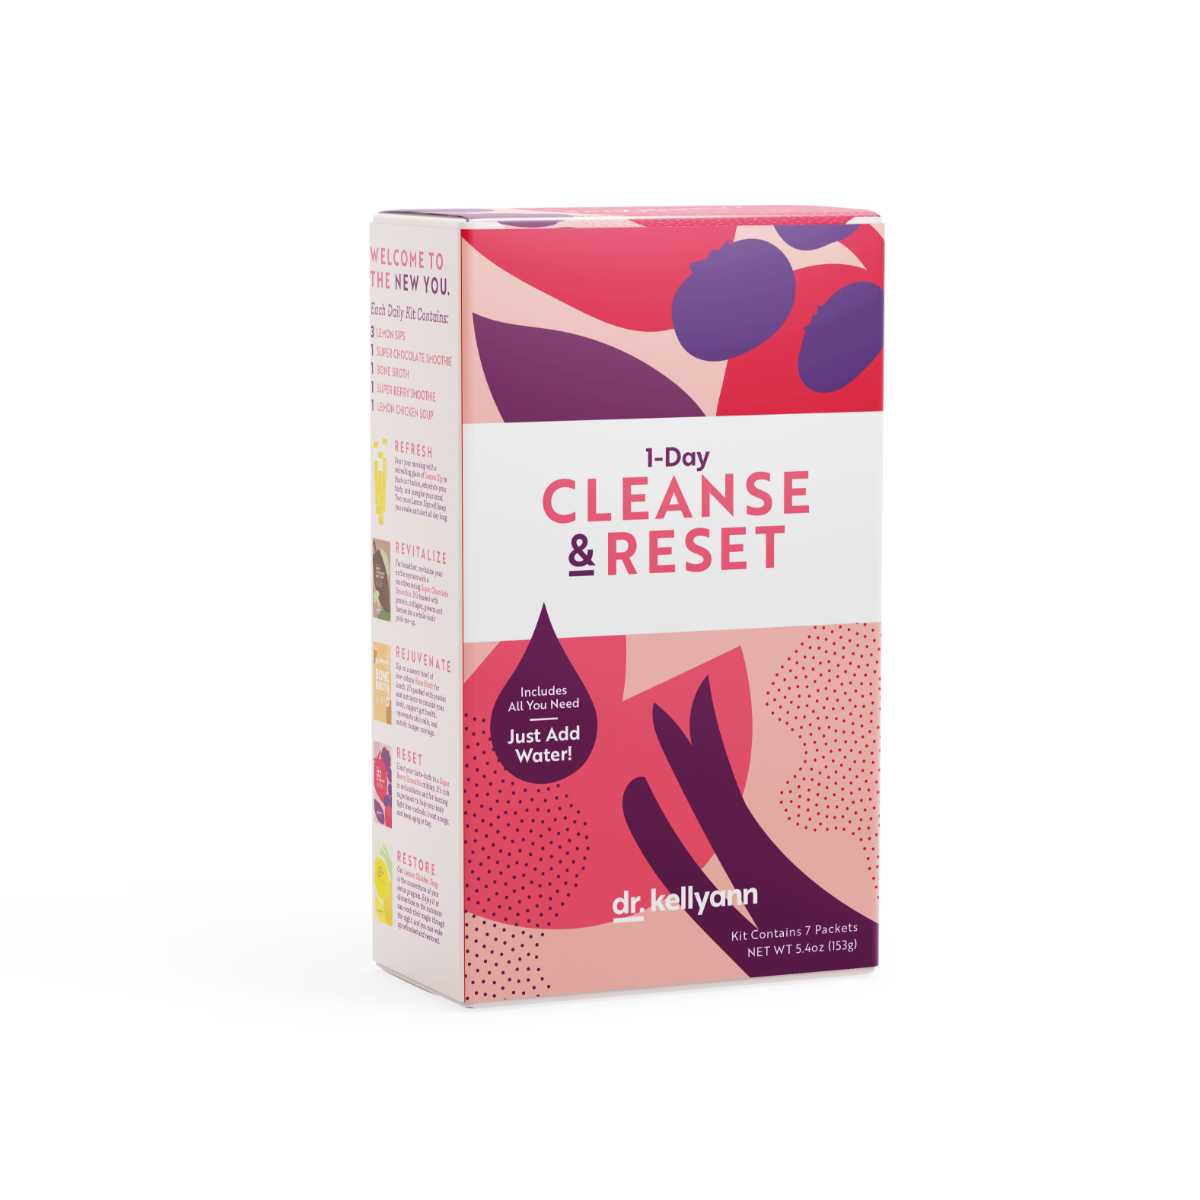 1-Day Cleanse and Reset Kit